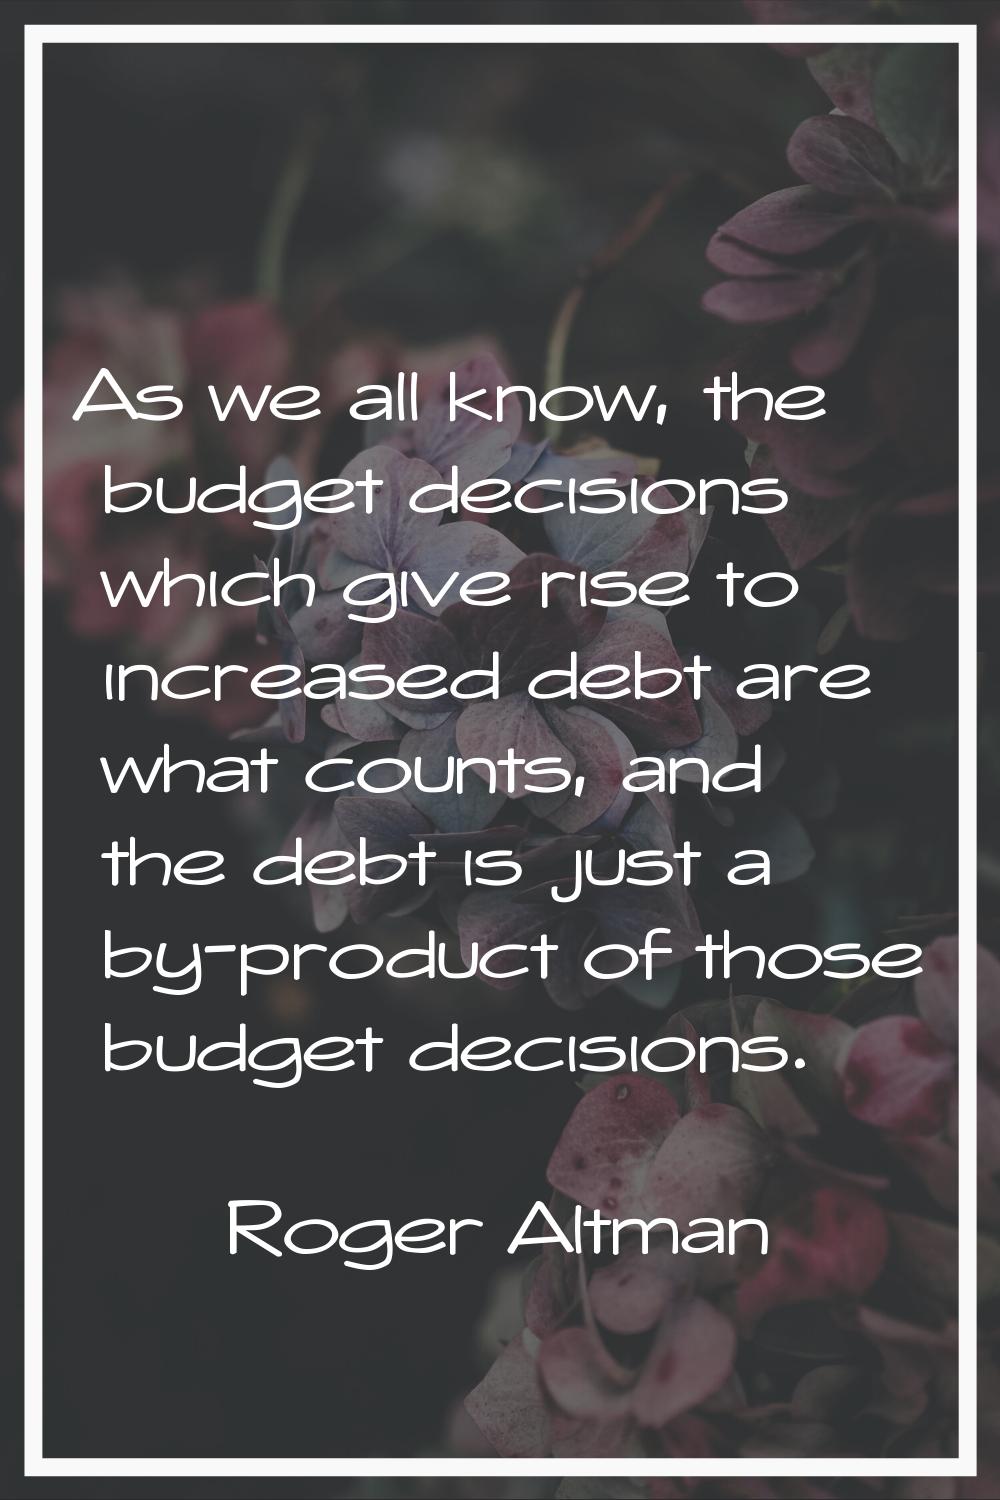 As we all know, the budget decisions which give rise to increased debt are what counts, and the deb